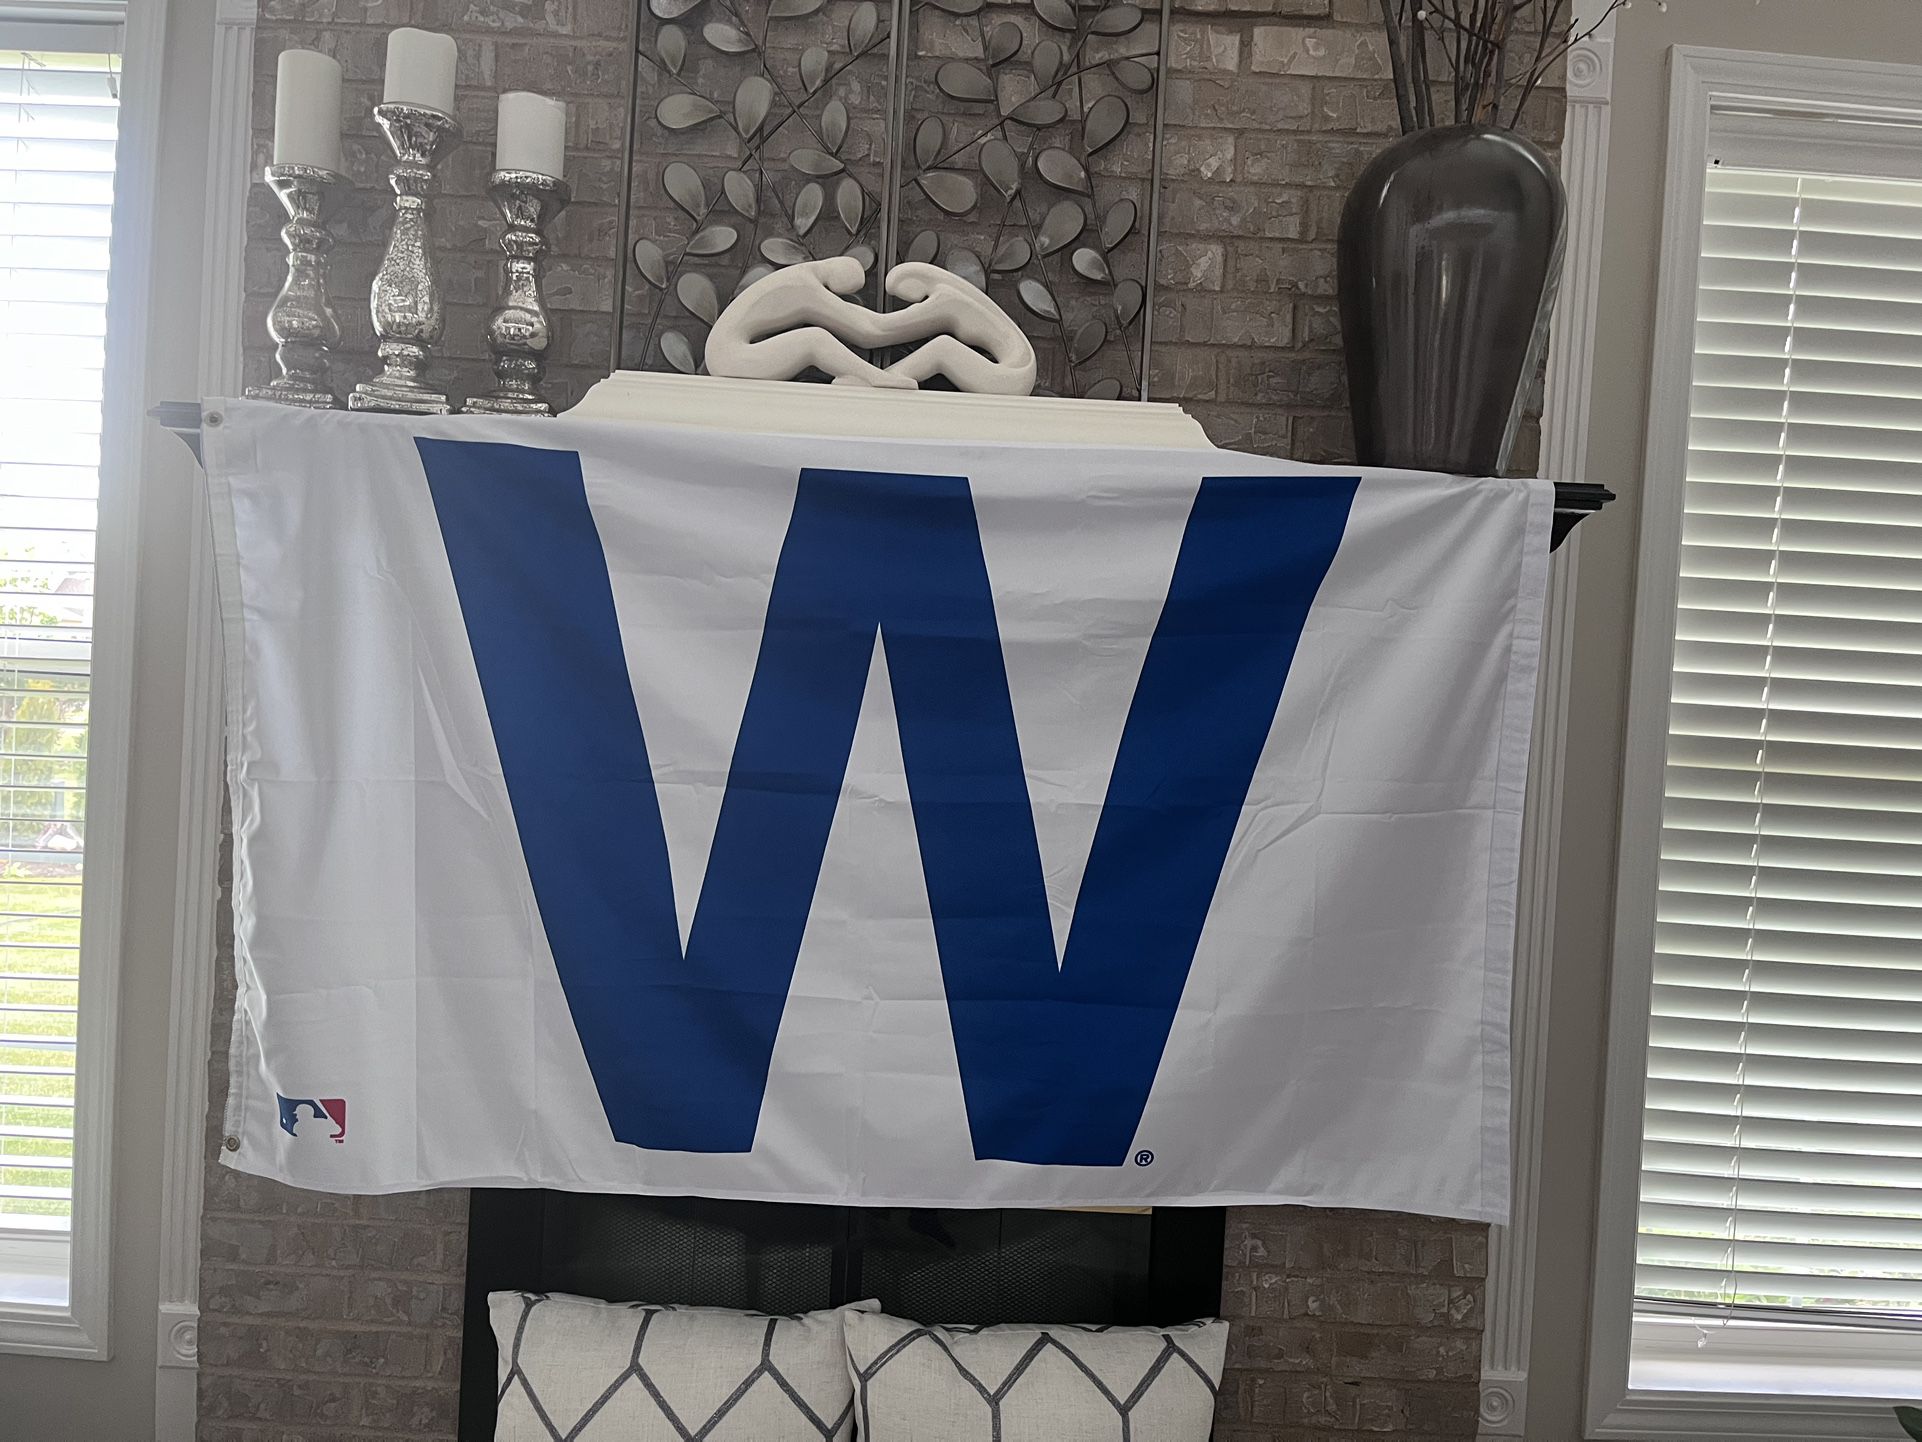 Cubs - fly the “W” flag for Sale in Bloomingdale, IL - OfferUp